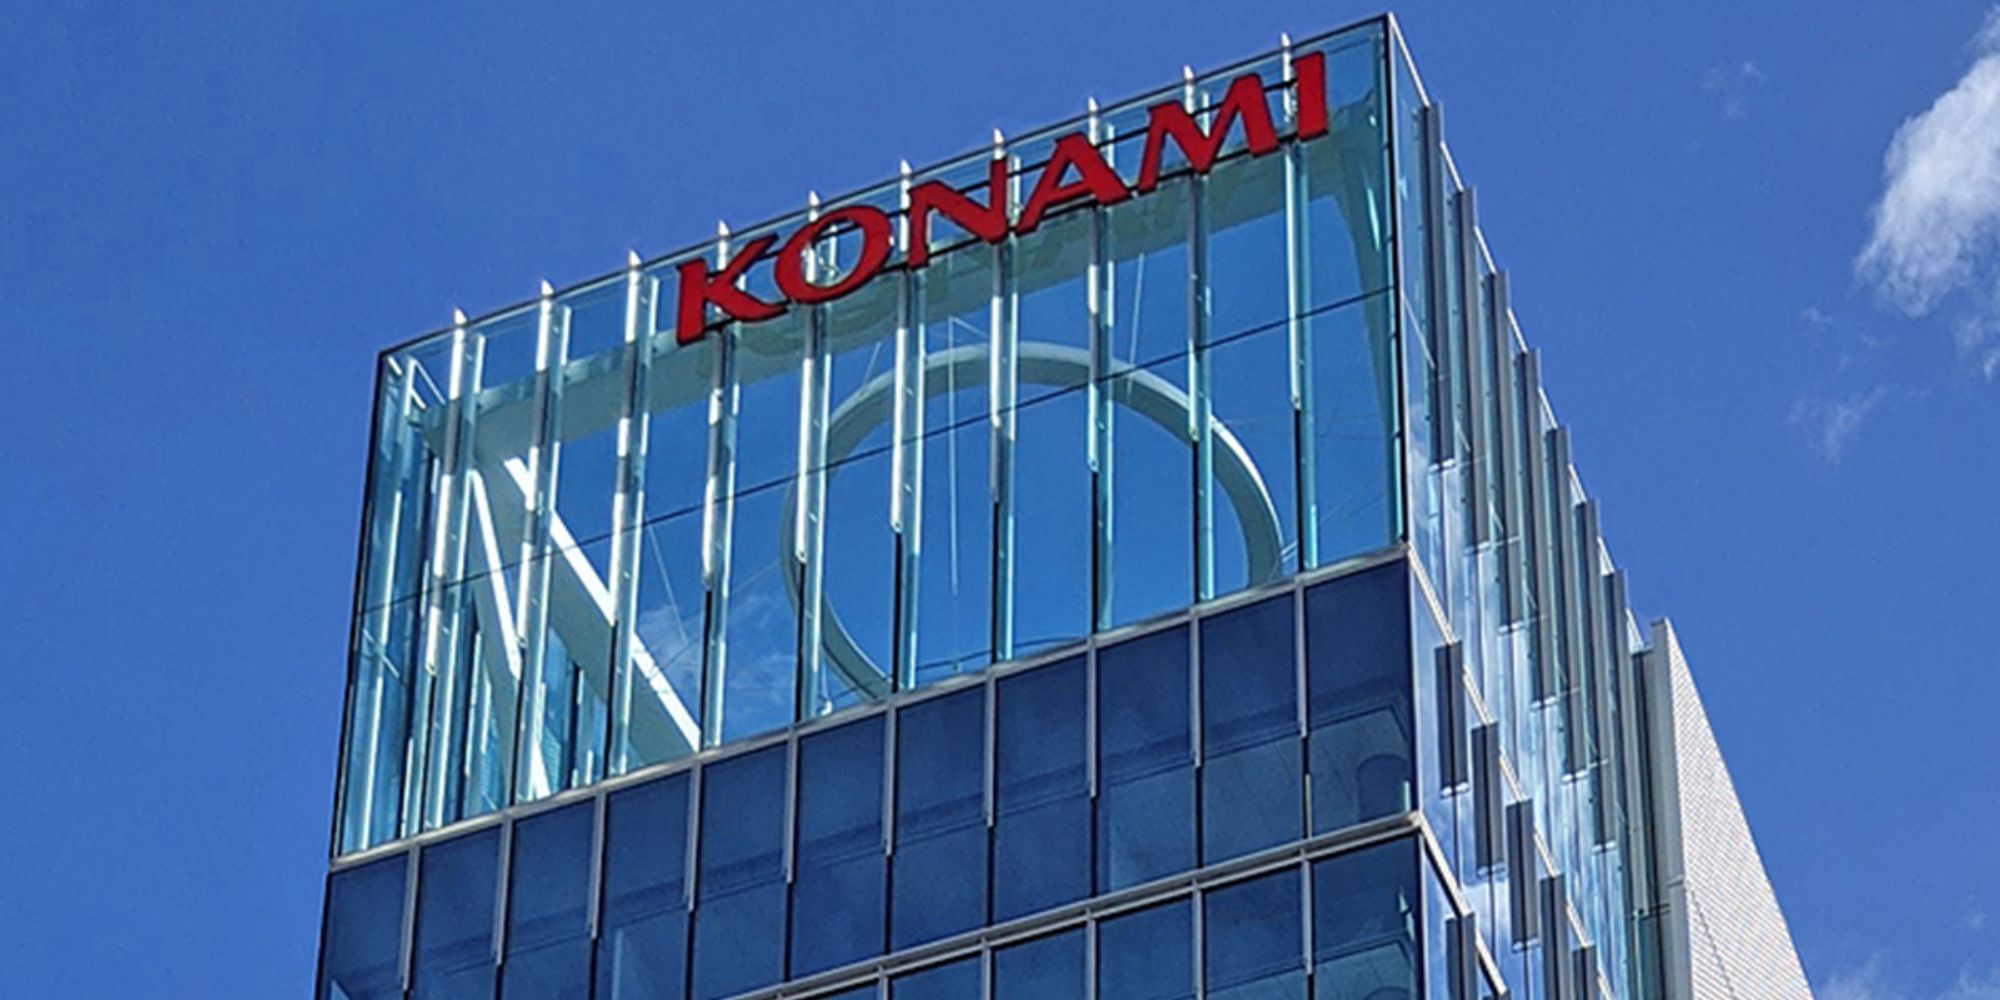 Konami Worker Reportedly Charged With Attempted Murder After Attacking Boss